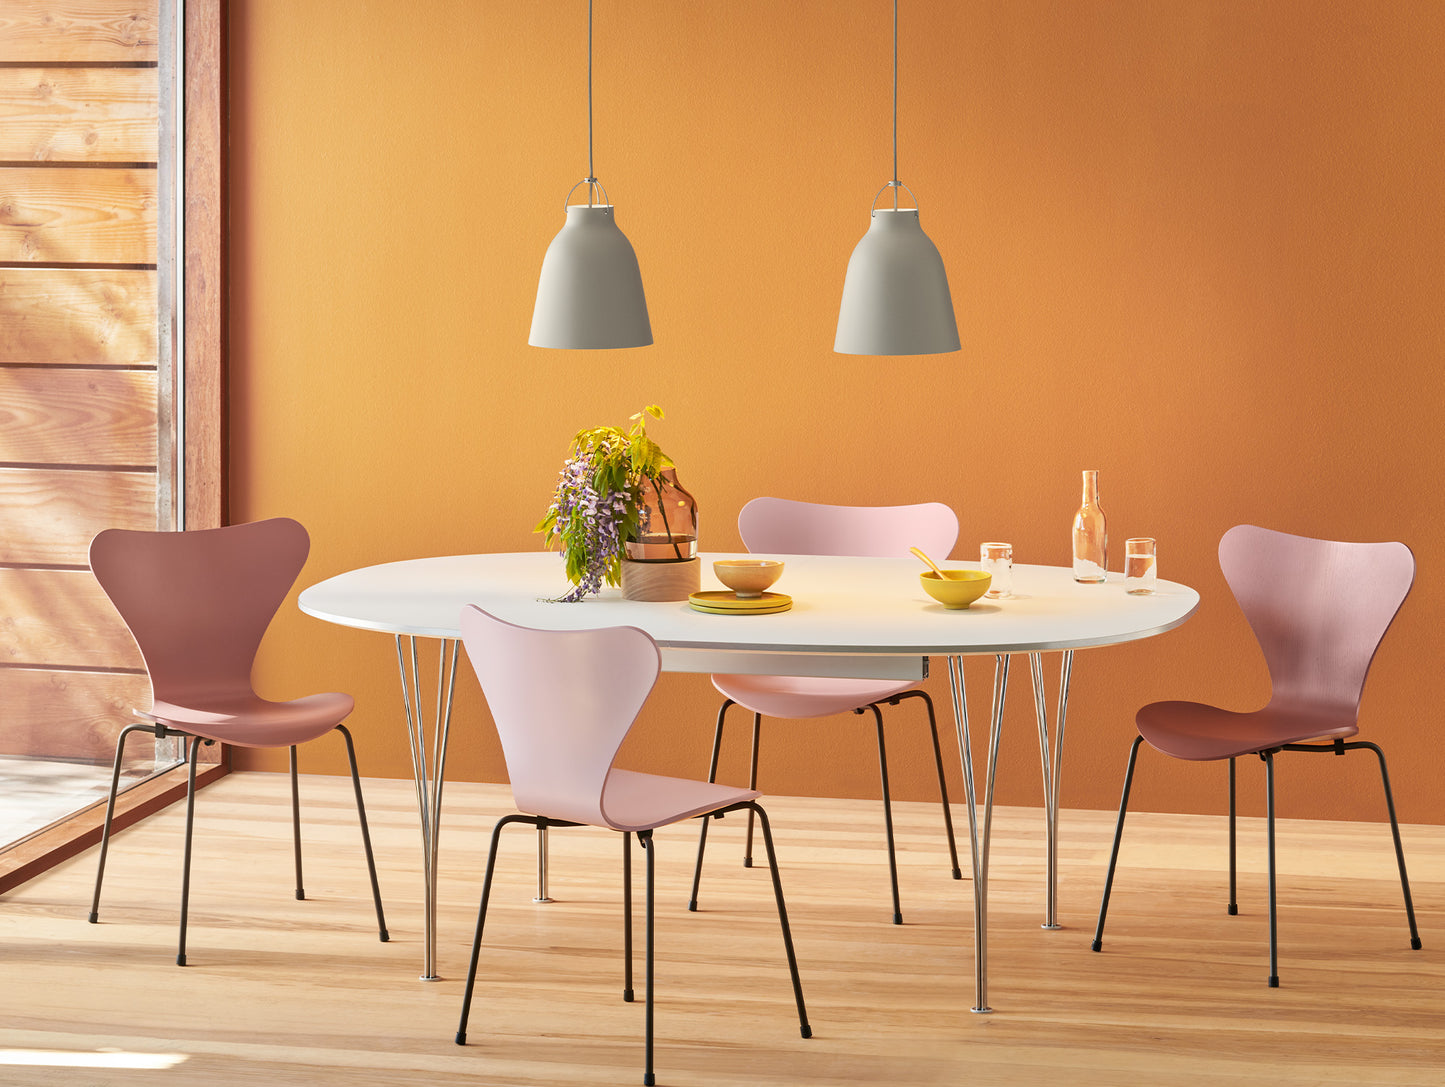 Series 7™ 3107 Dining Chair by Fritz Hansen - Pale Rose, Wild Rose 